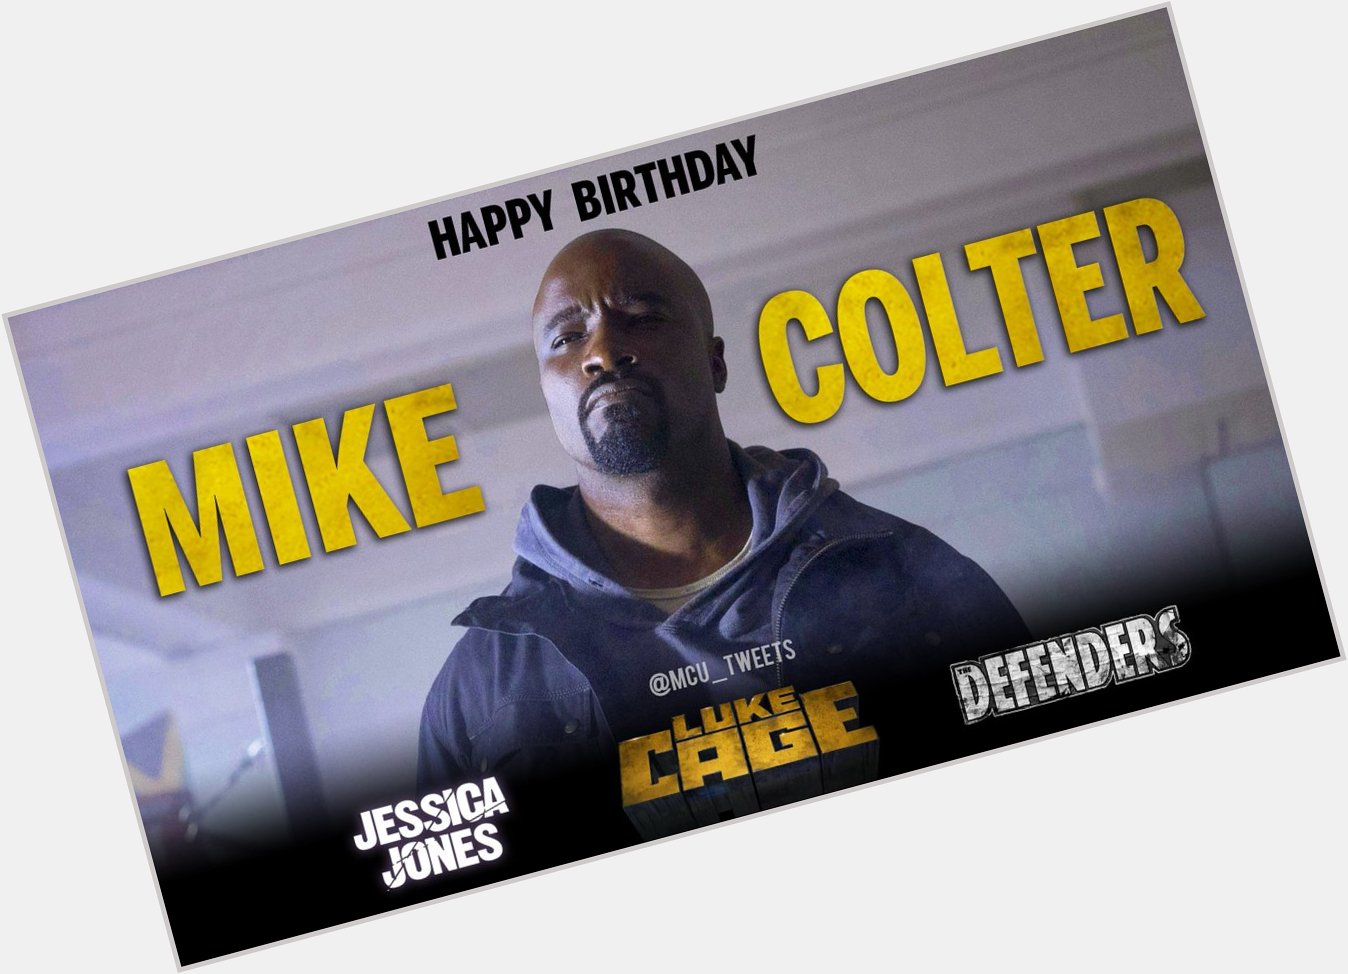 Wishing a very happy birthday to the Luke Cage of the MCU, Mike Colter, who turns 41 years old today! 